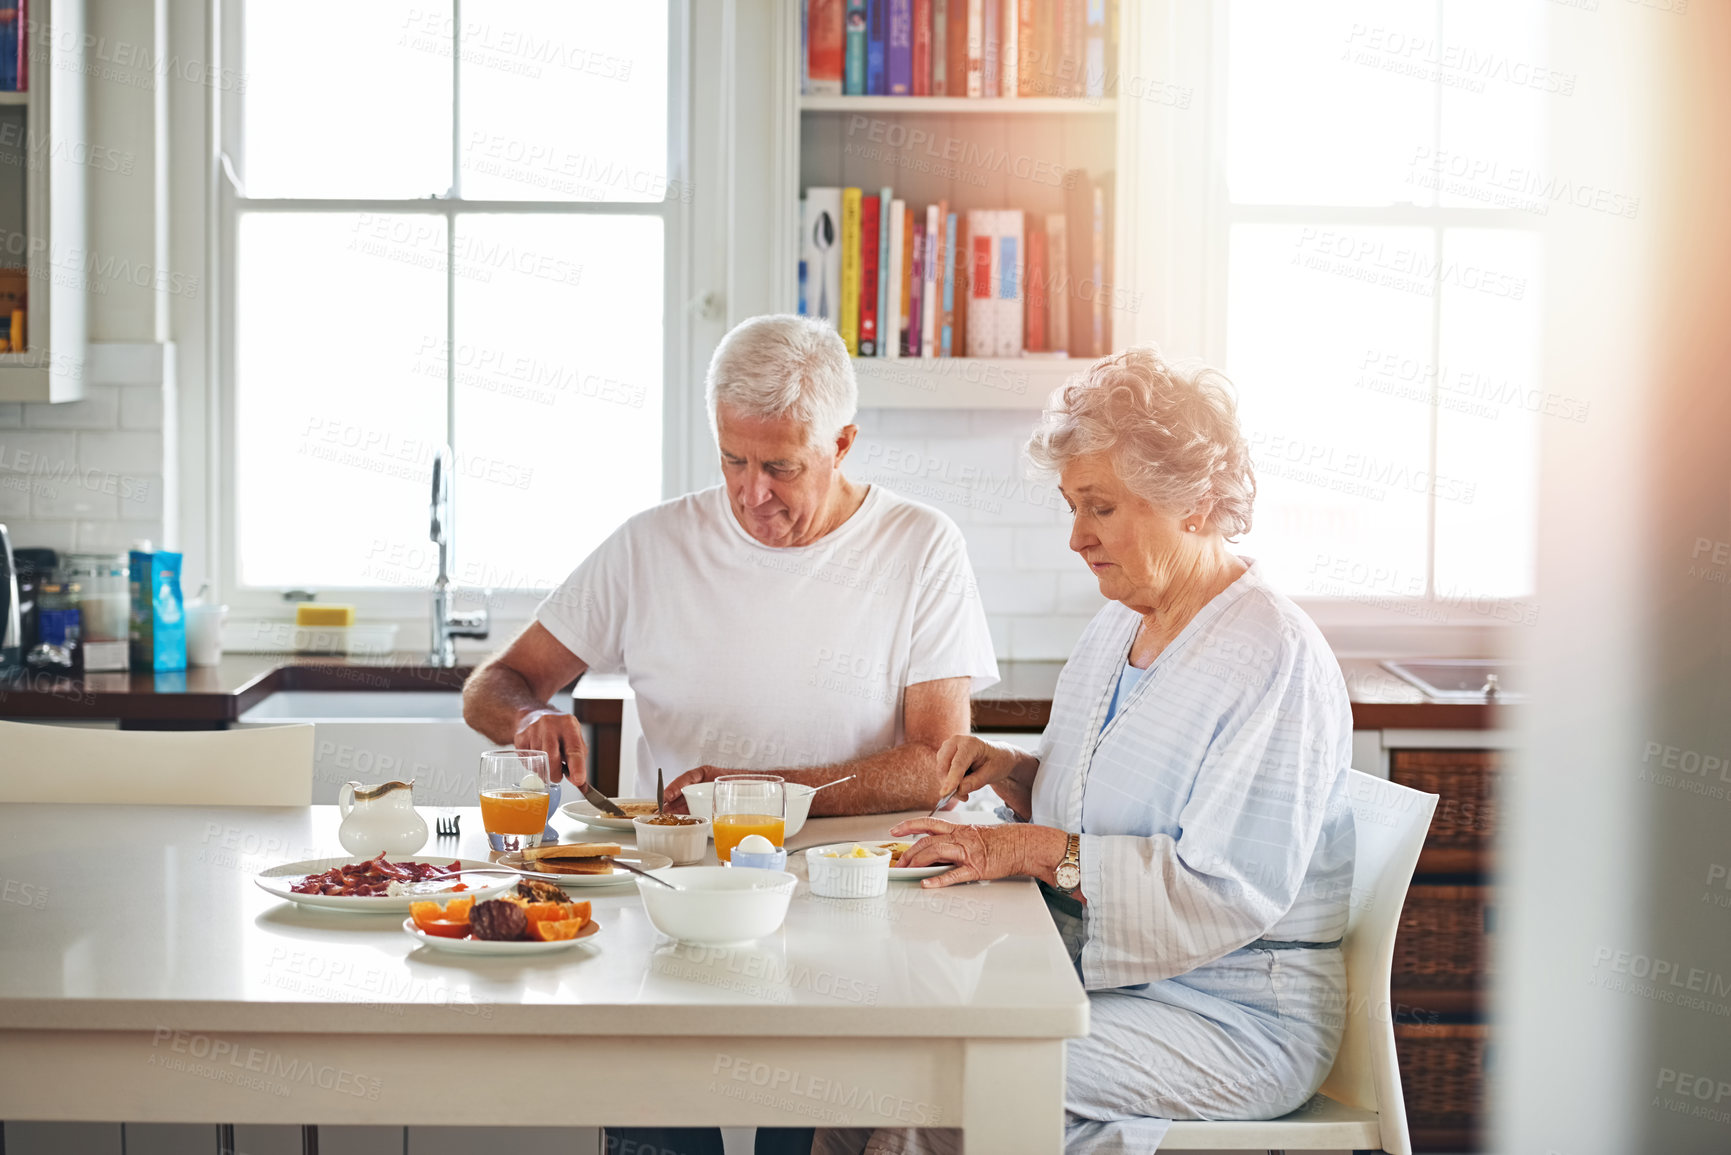 Buy stock photo Cropped shot of a senior couple having breakfast together at home